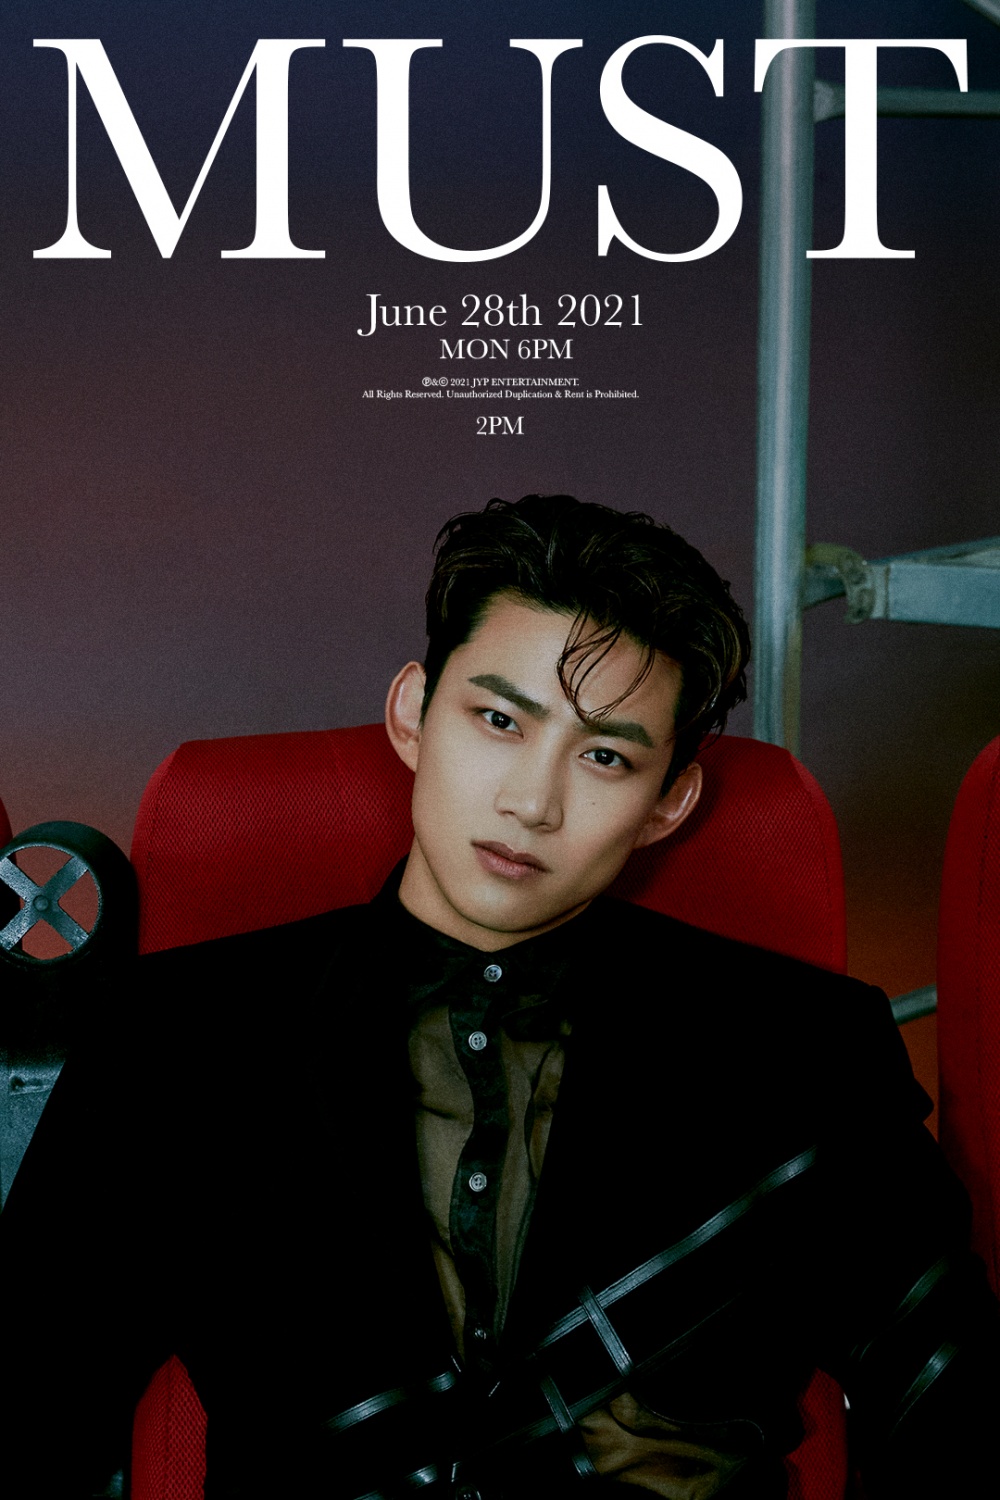 2PM Taecyeon, superior physical and soft eyes that cause excitement